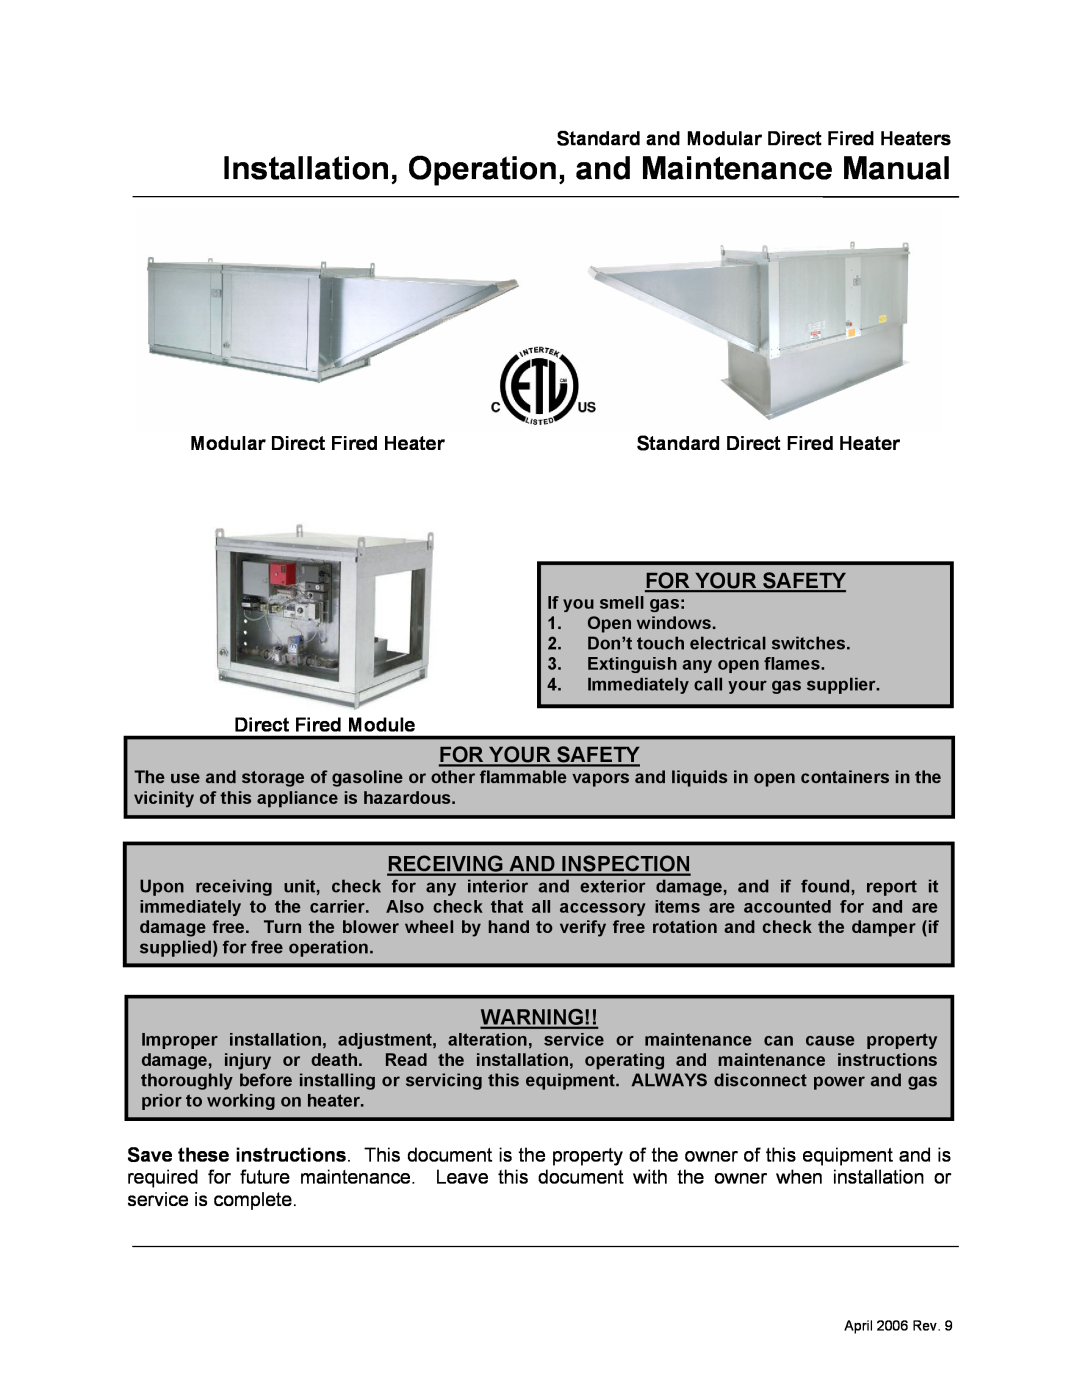 Energy Tech Laboratories Modular Direct Fired Heaters manual For Your Safety, Receiving And Inspection 